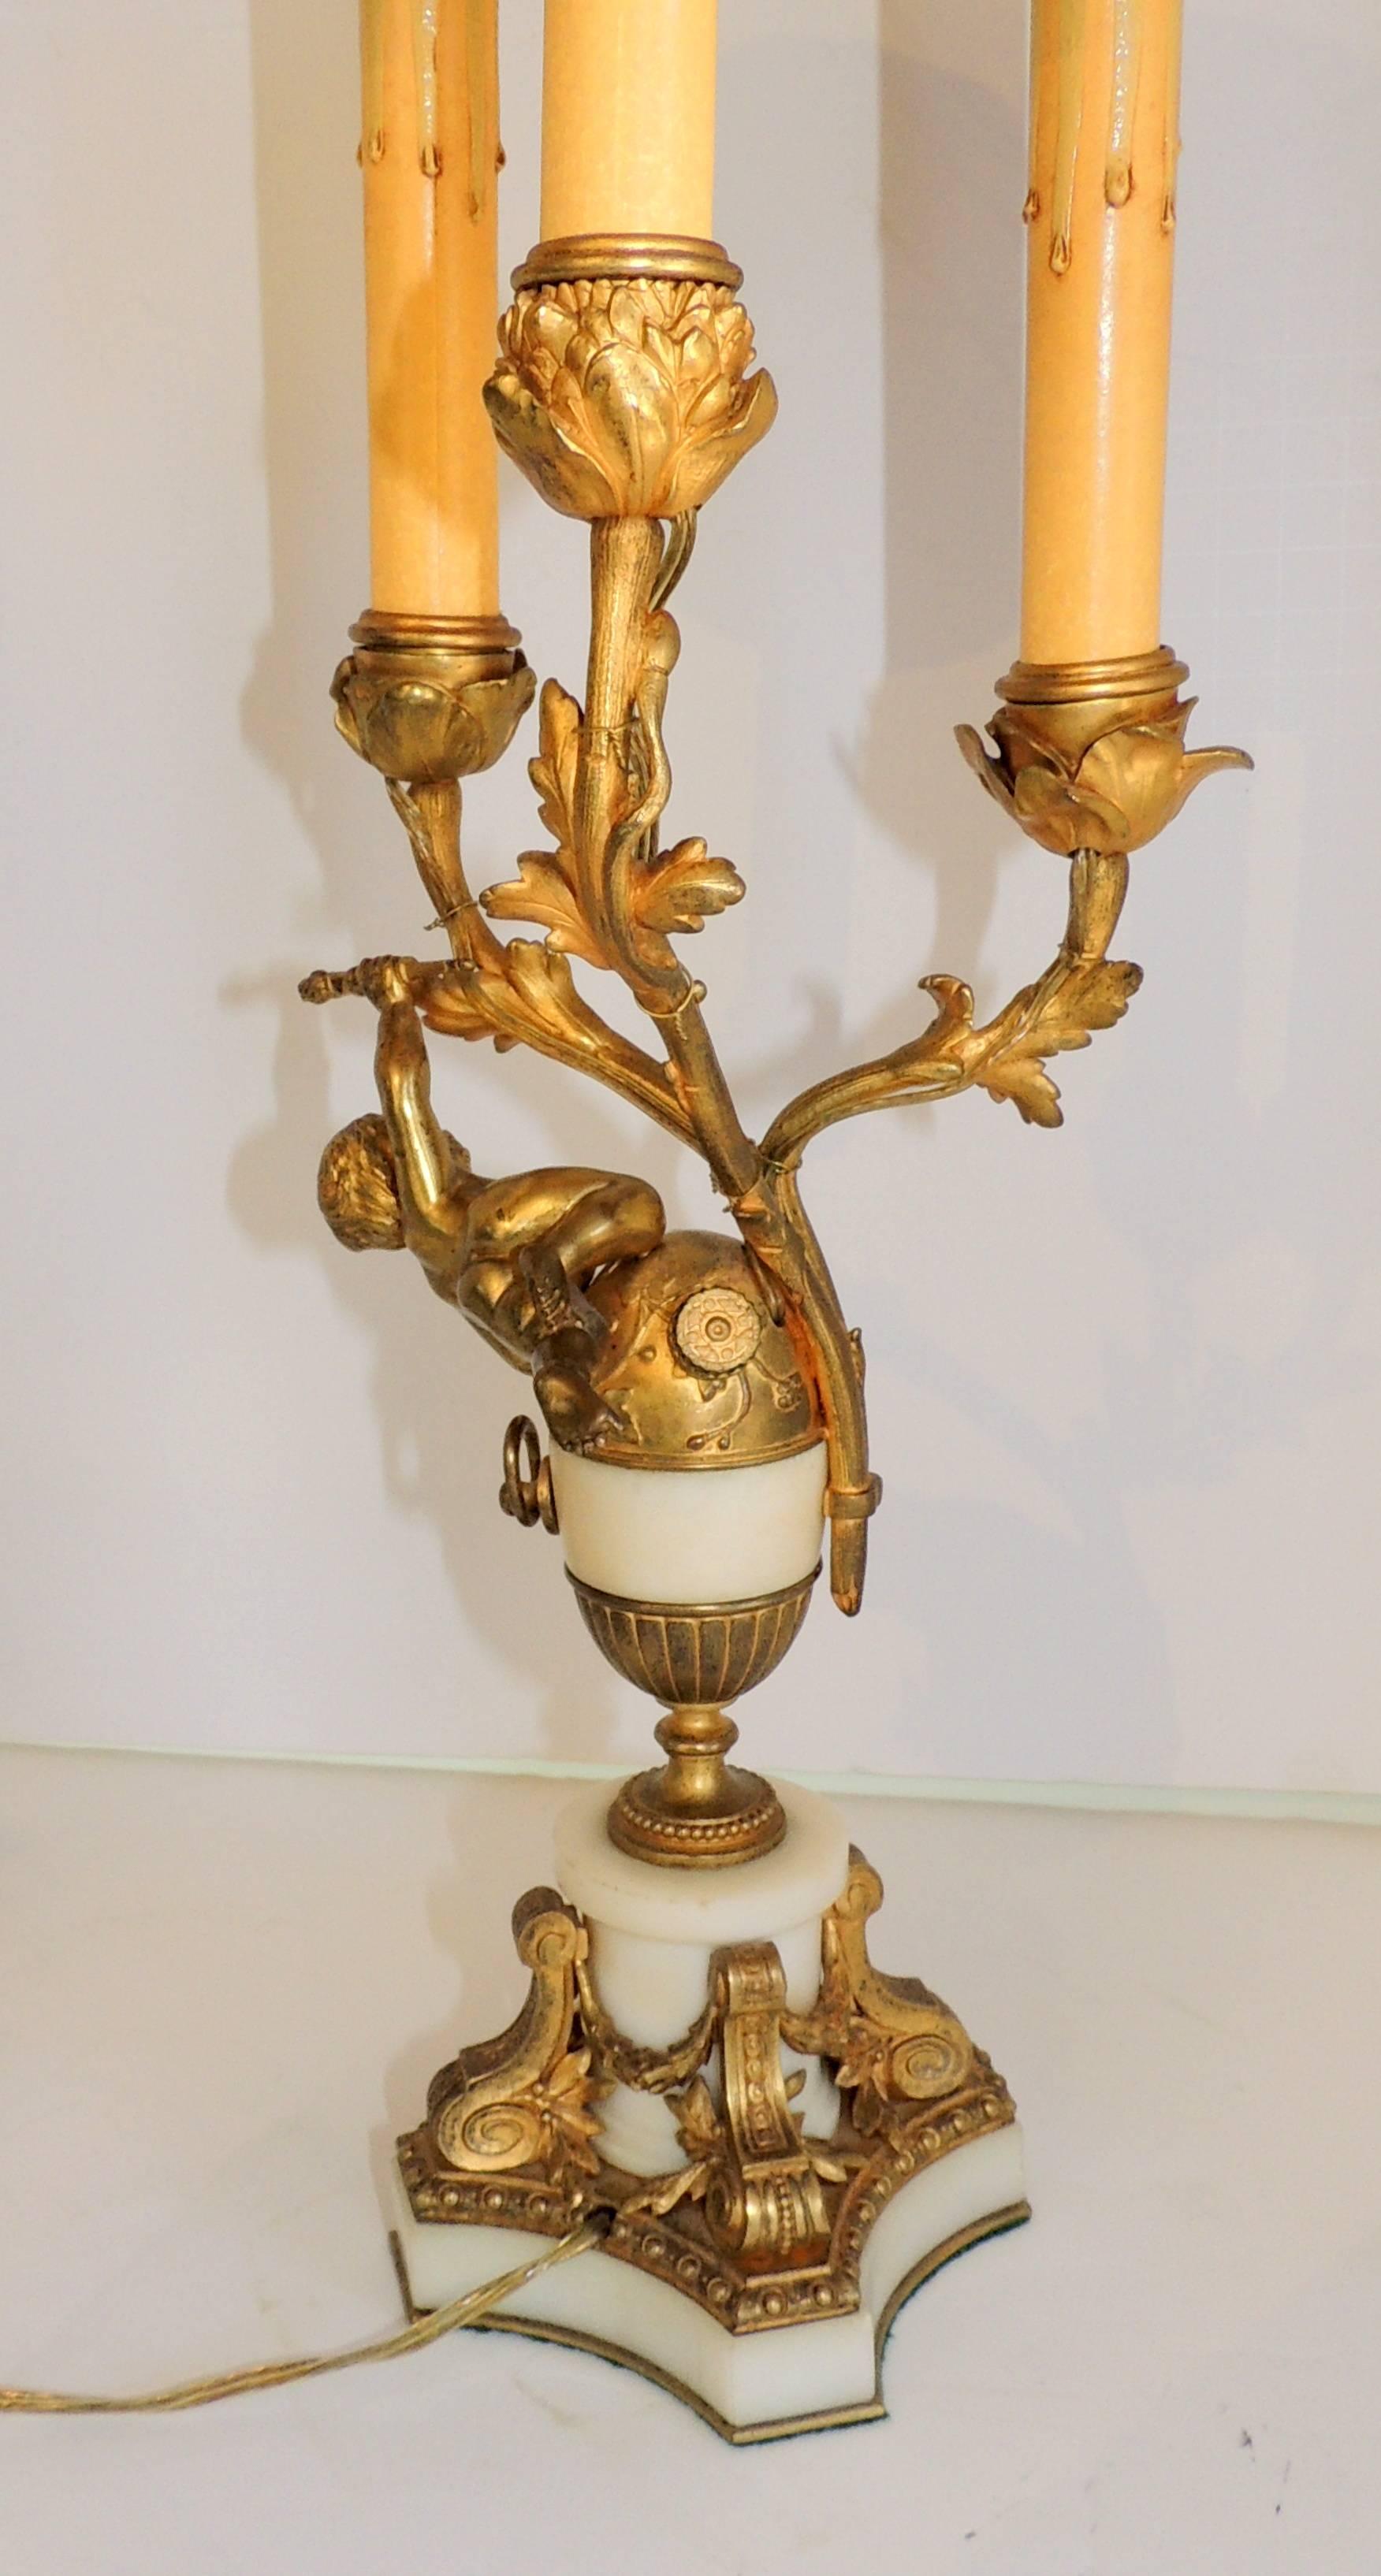 Beautiful French Dore Bronze Marble Cherub Ormolu-Mounted Candelabra Lamps, Pair For Sale 2